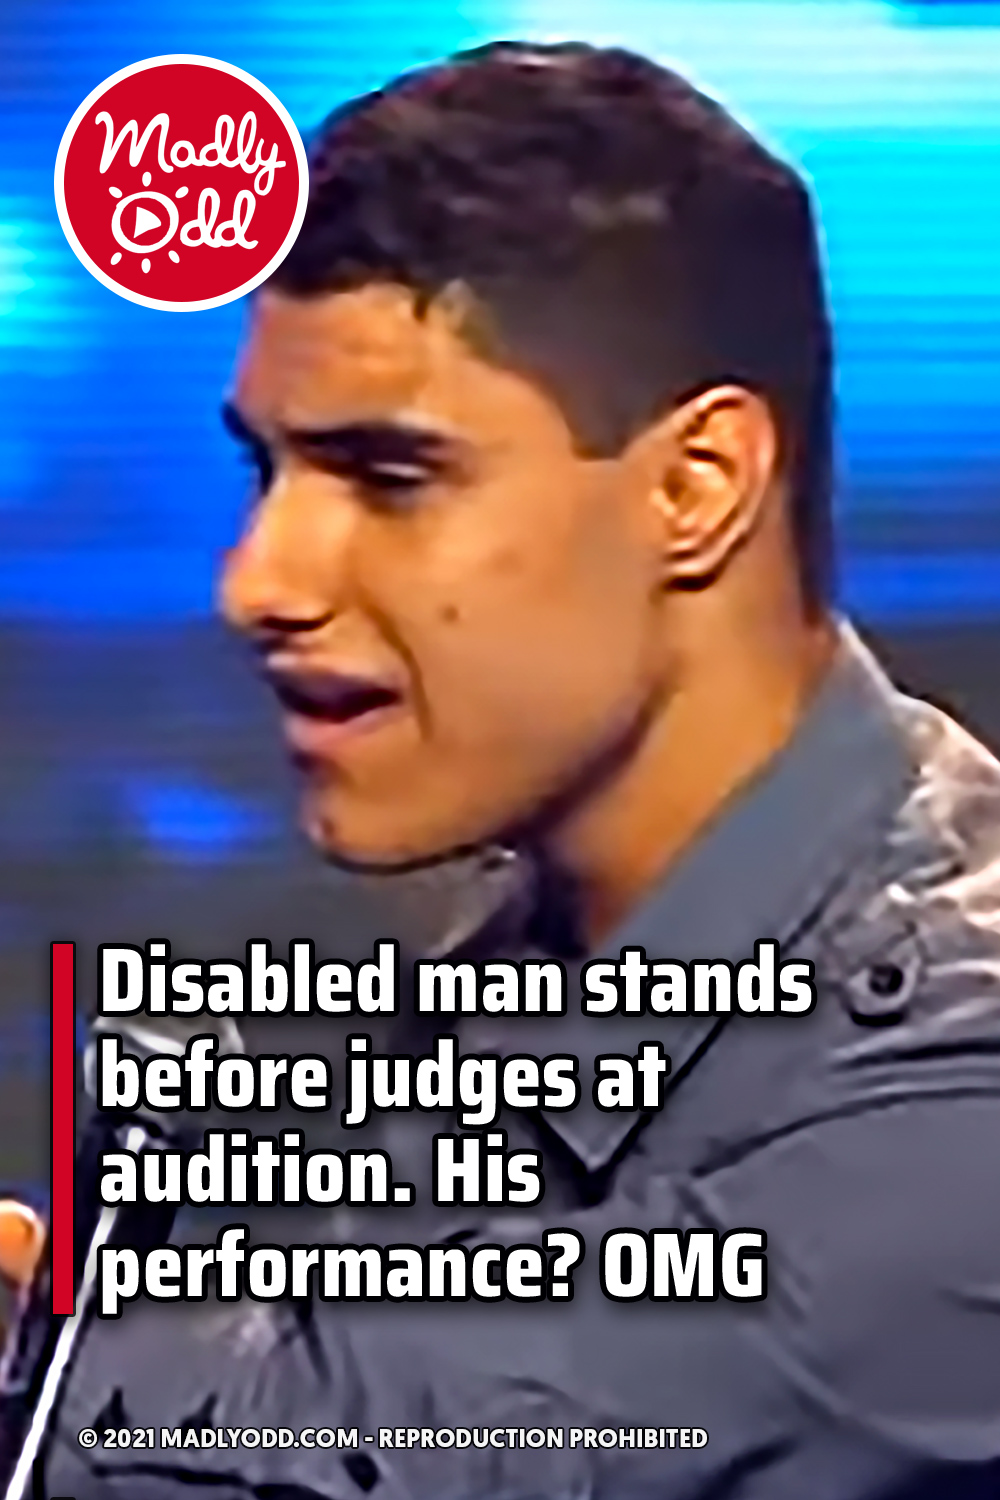 Disabled man stands before judges at audition. His performance? OMG